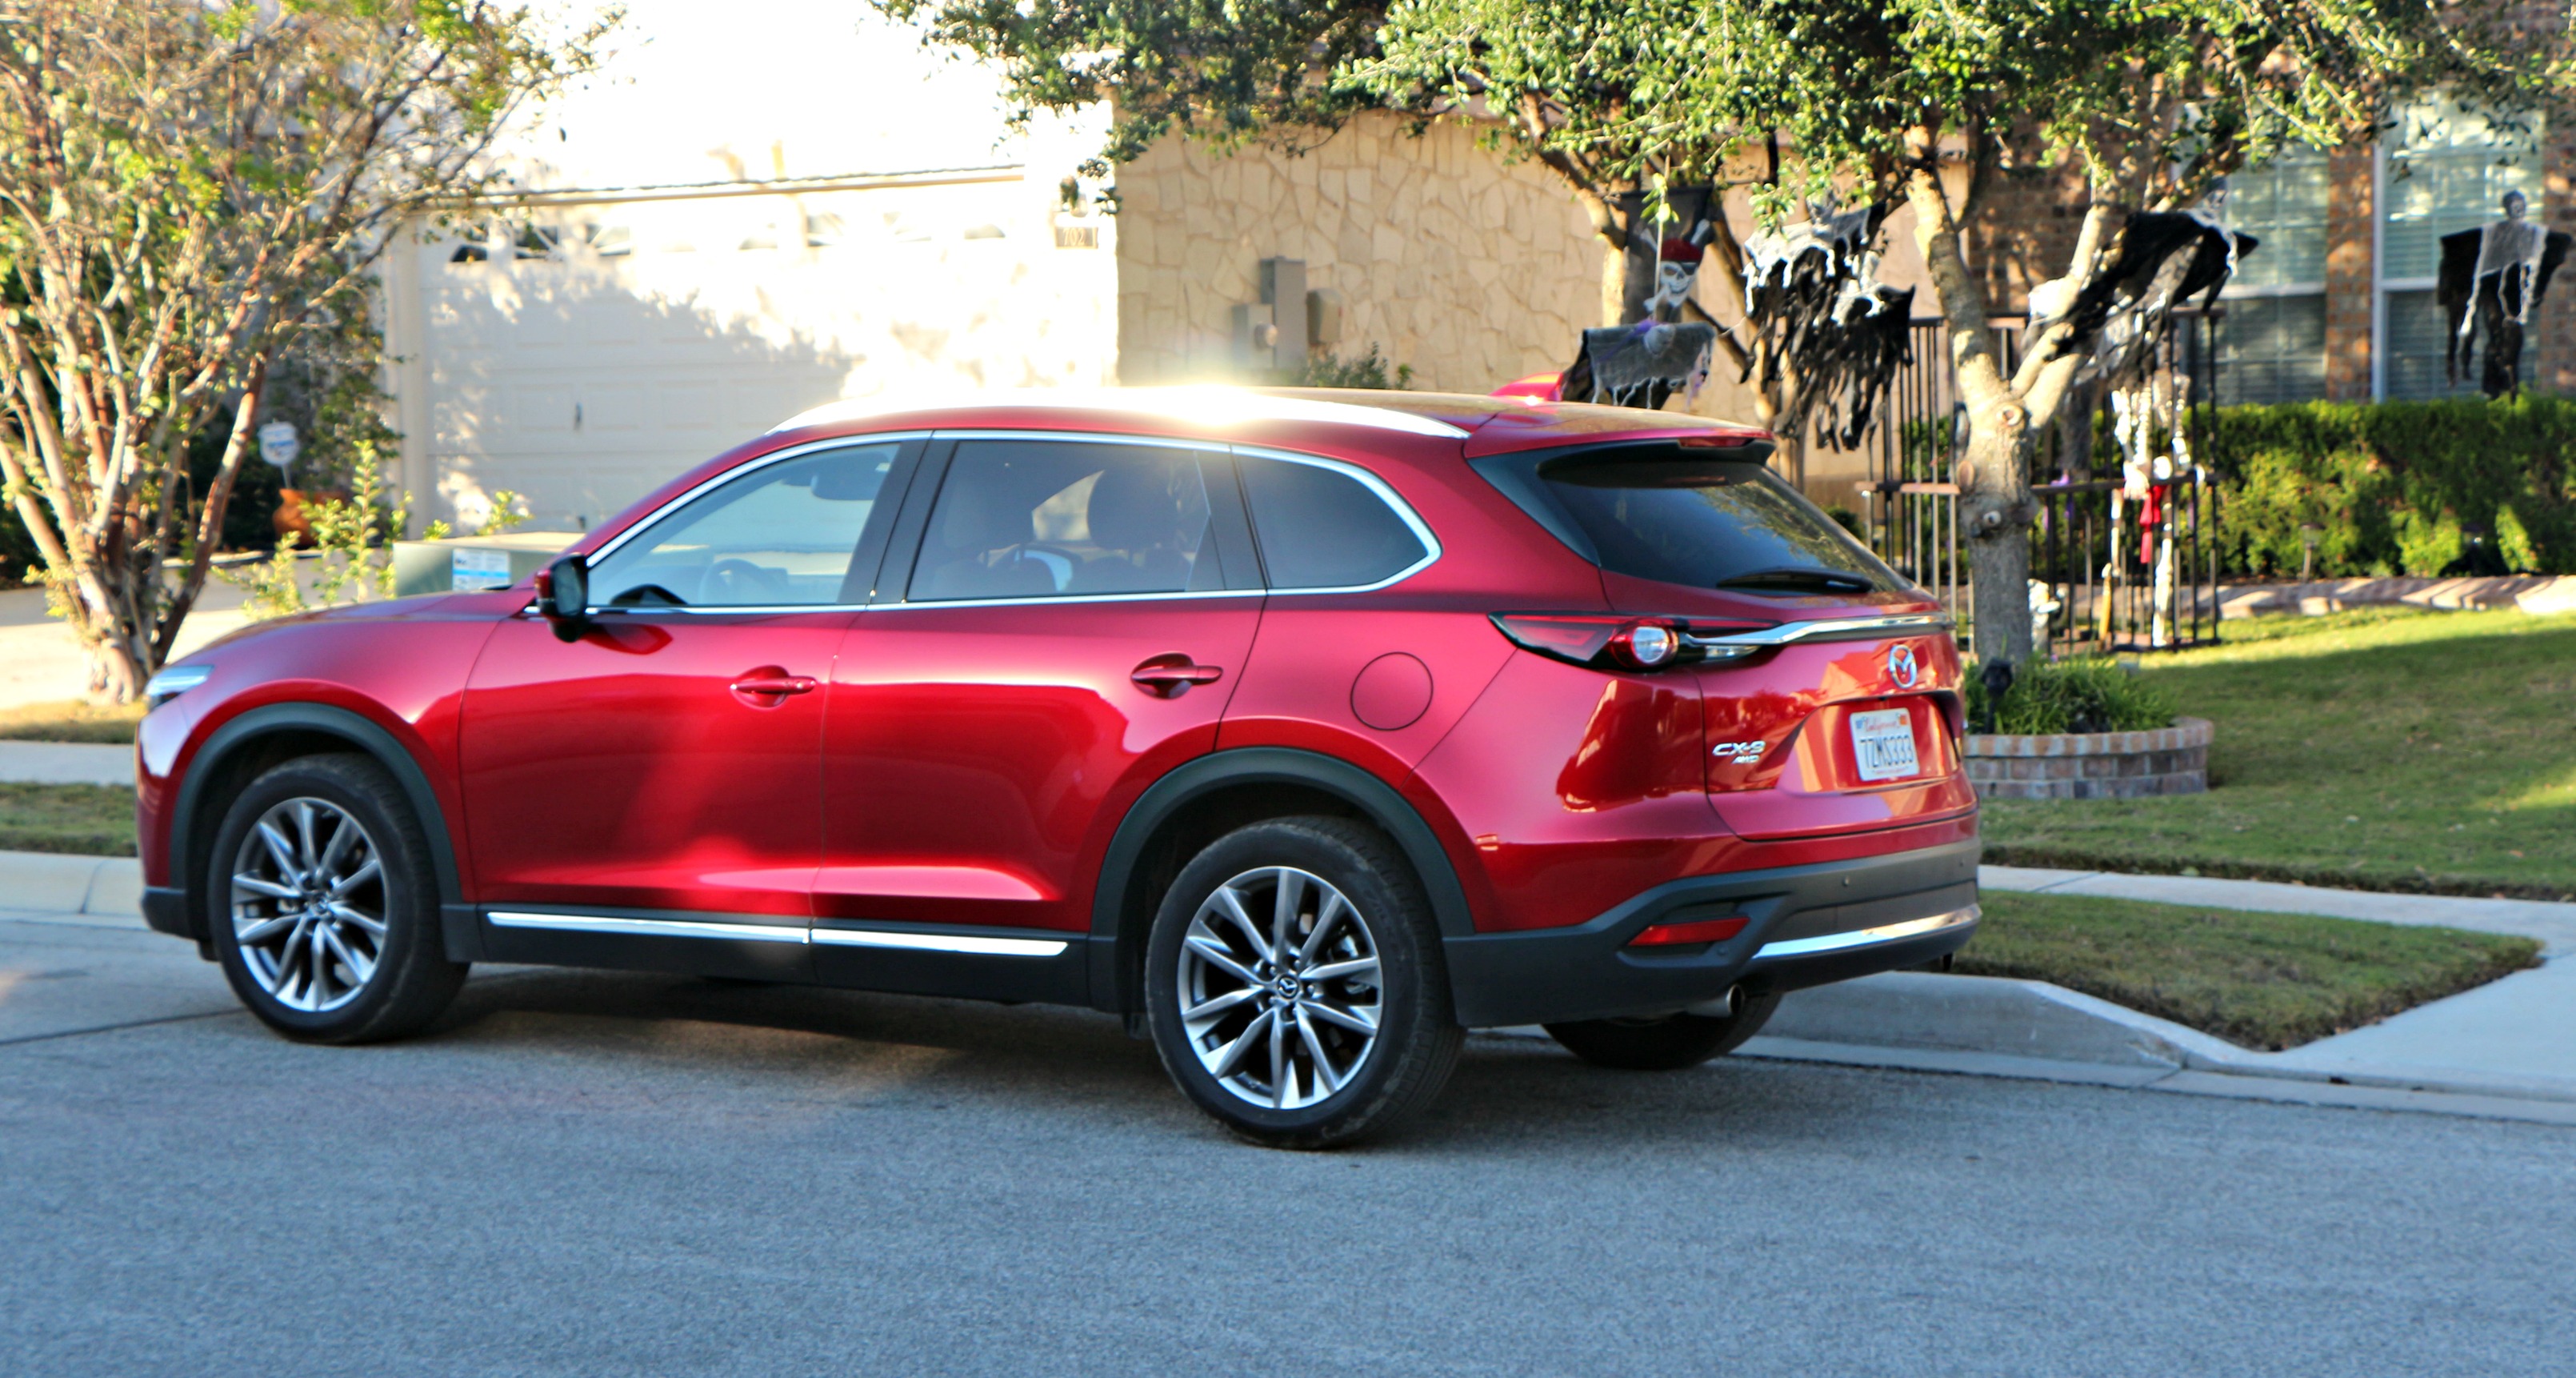 Driving the Mazda CX-9 All Wheel Drive|Ripped Jeans and Bifocals